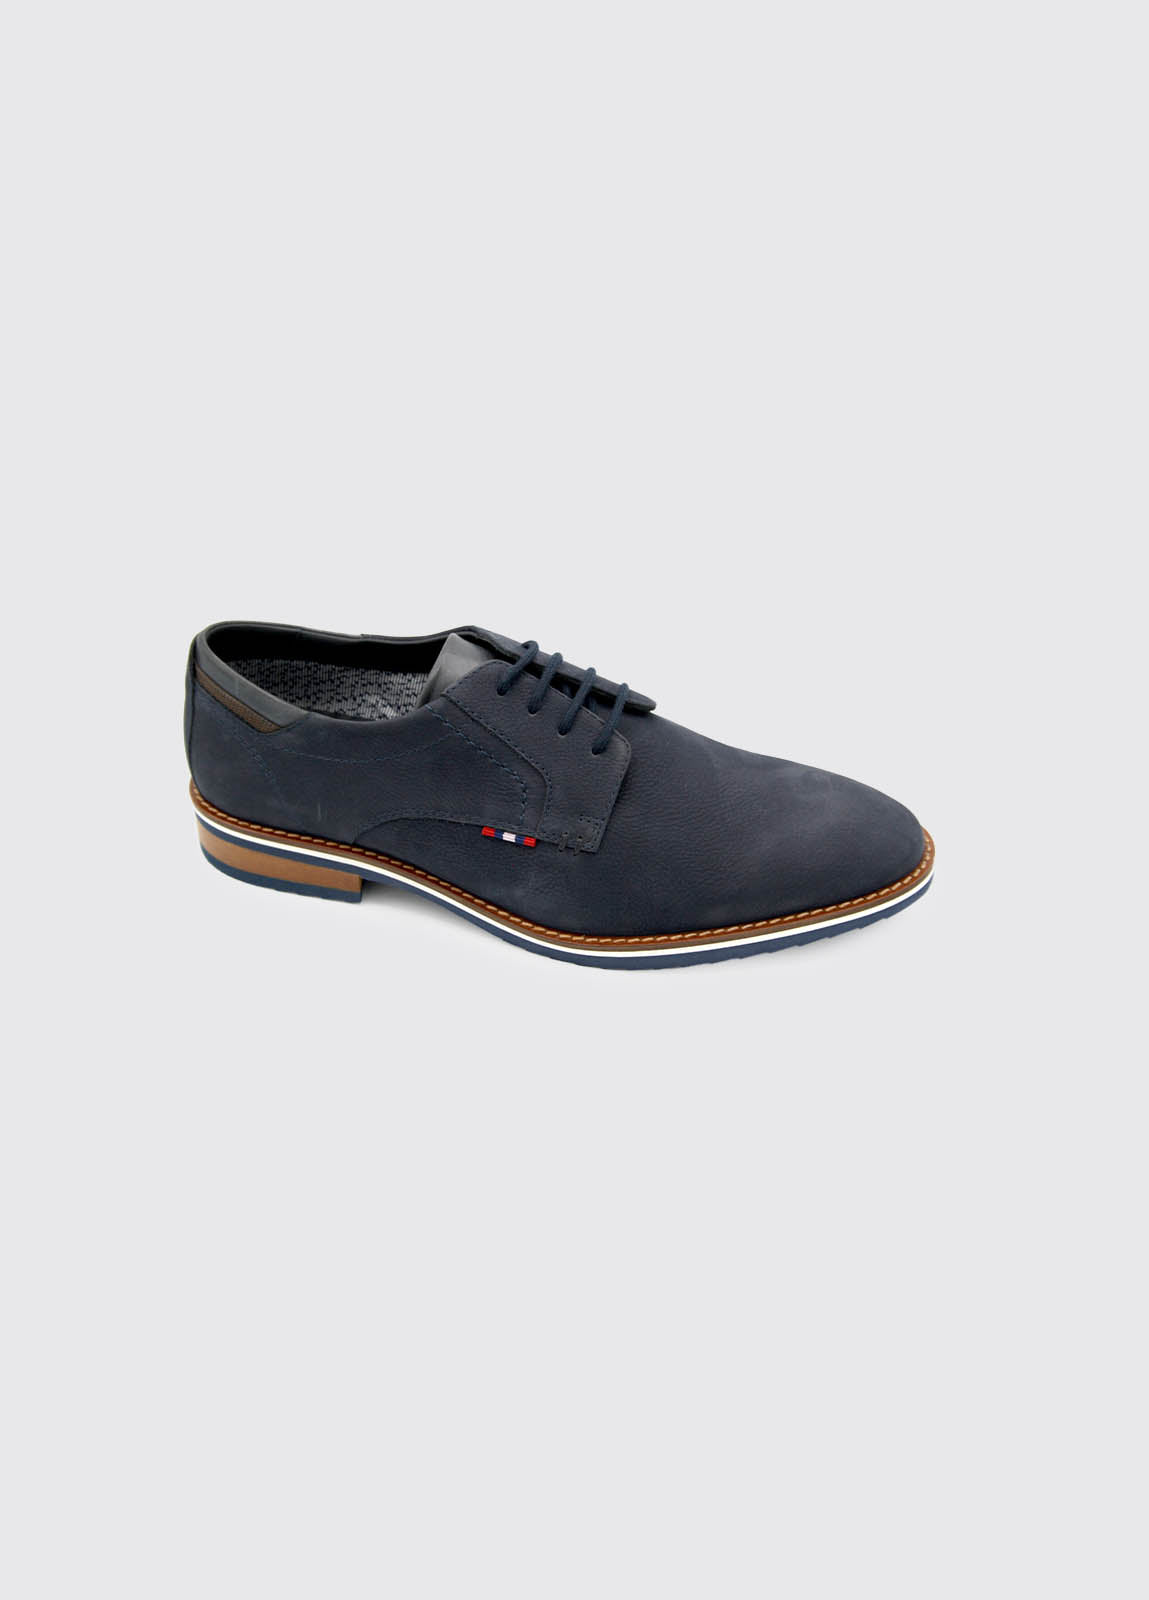 Danny Navy Shoe-Side view